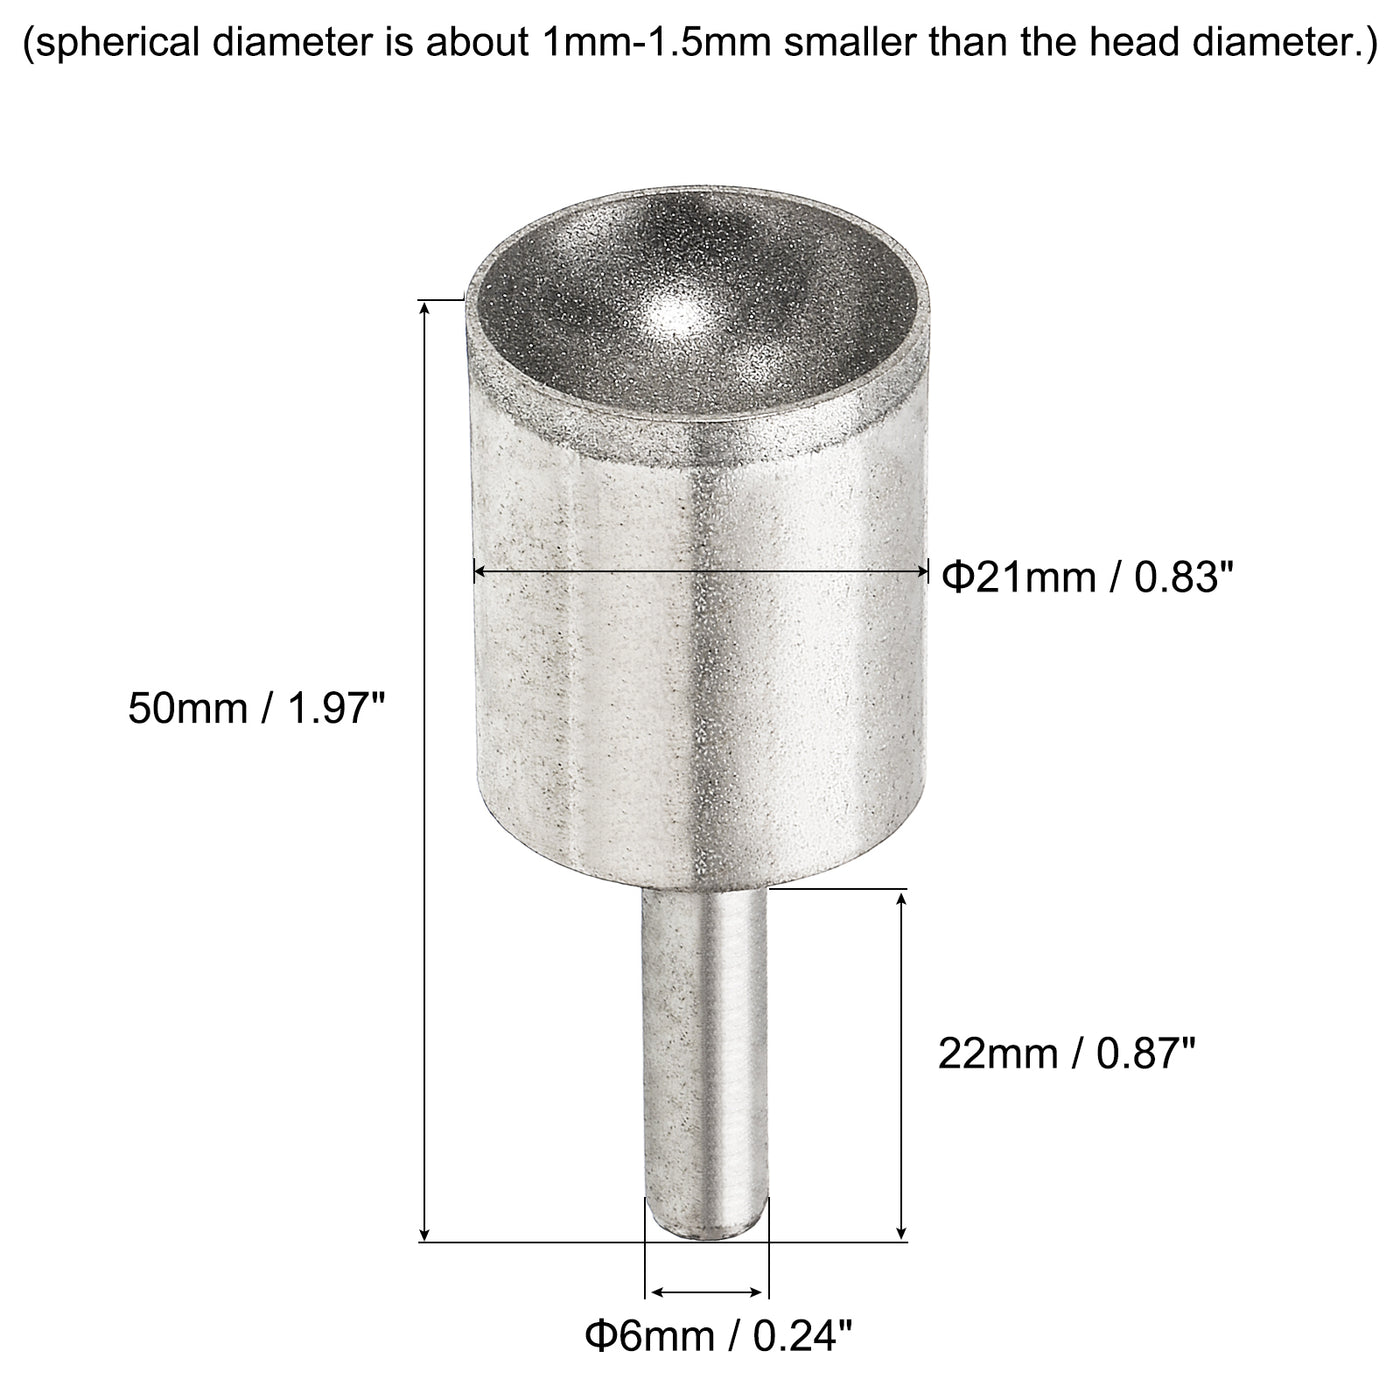 uxcell Uxcell 21mm 600 Grits Diamond Mounted Point Spherical Concave Head Bead Grinding Bit